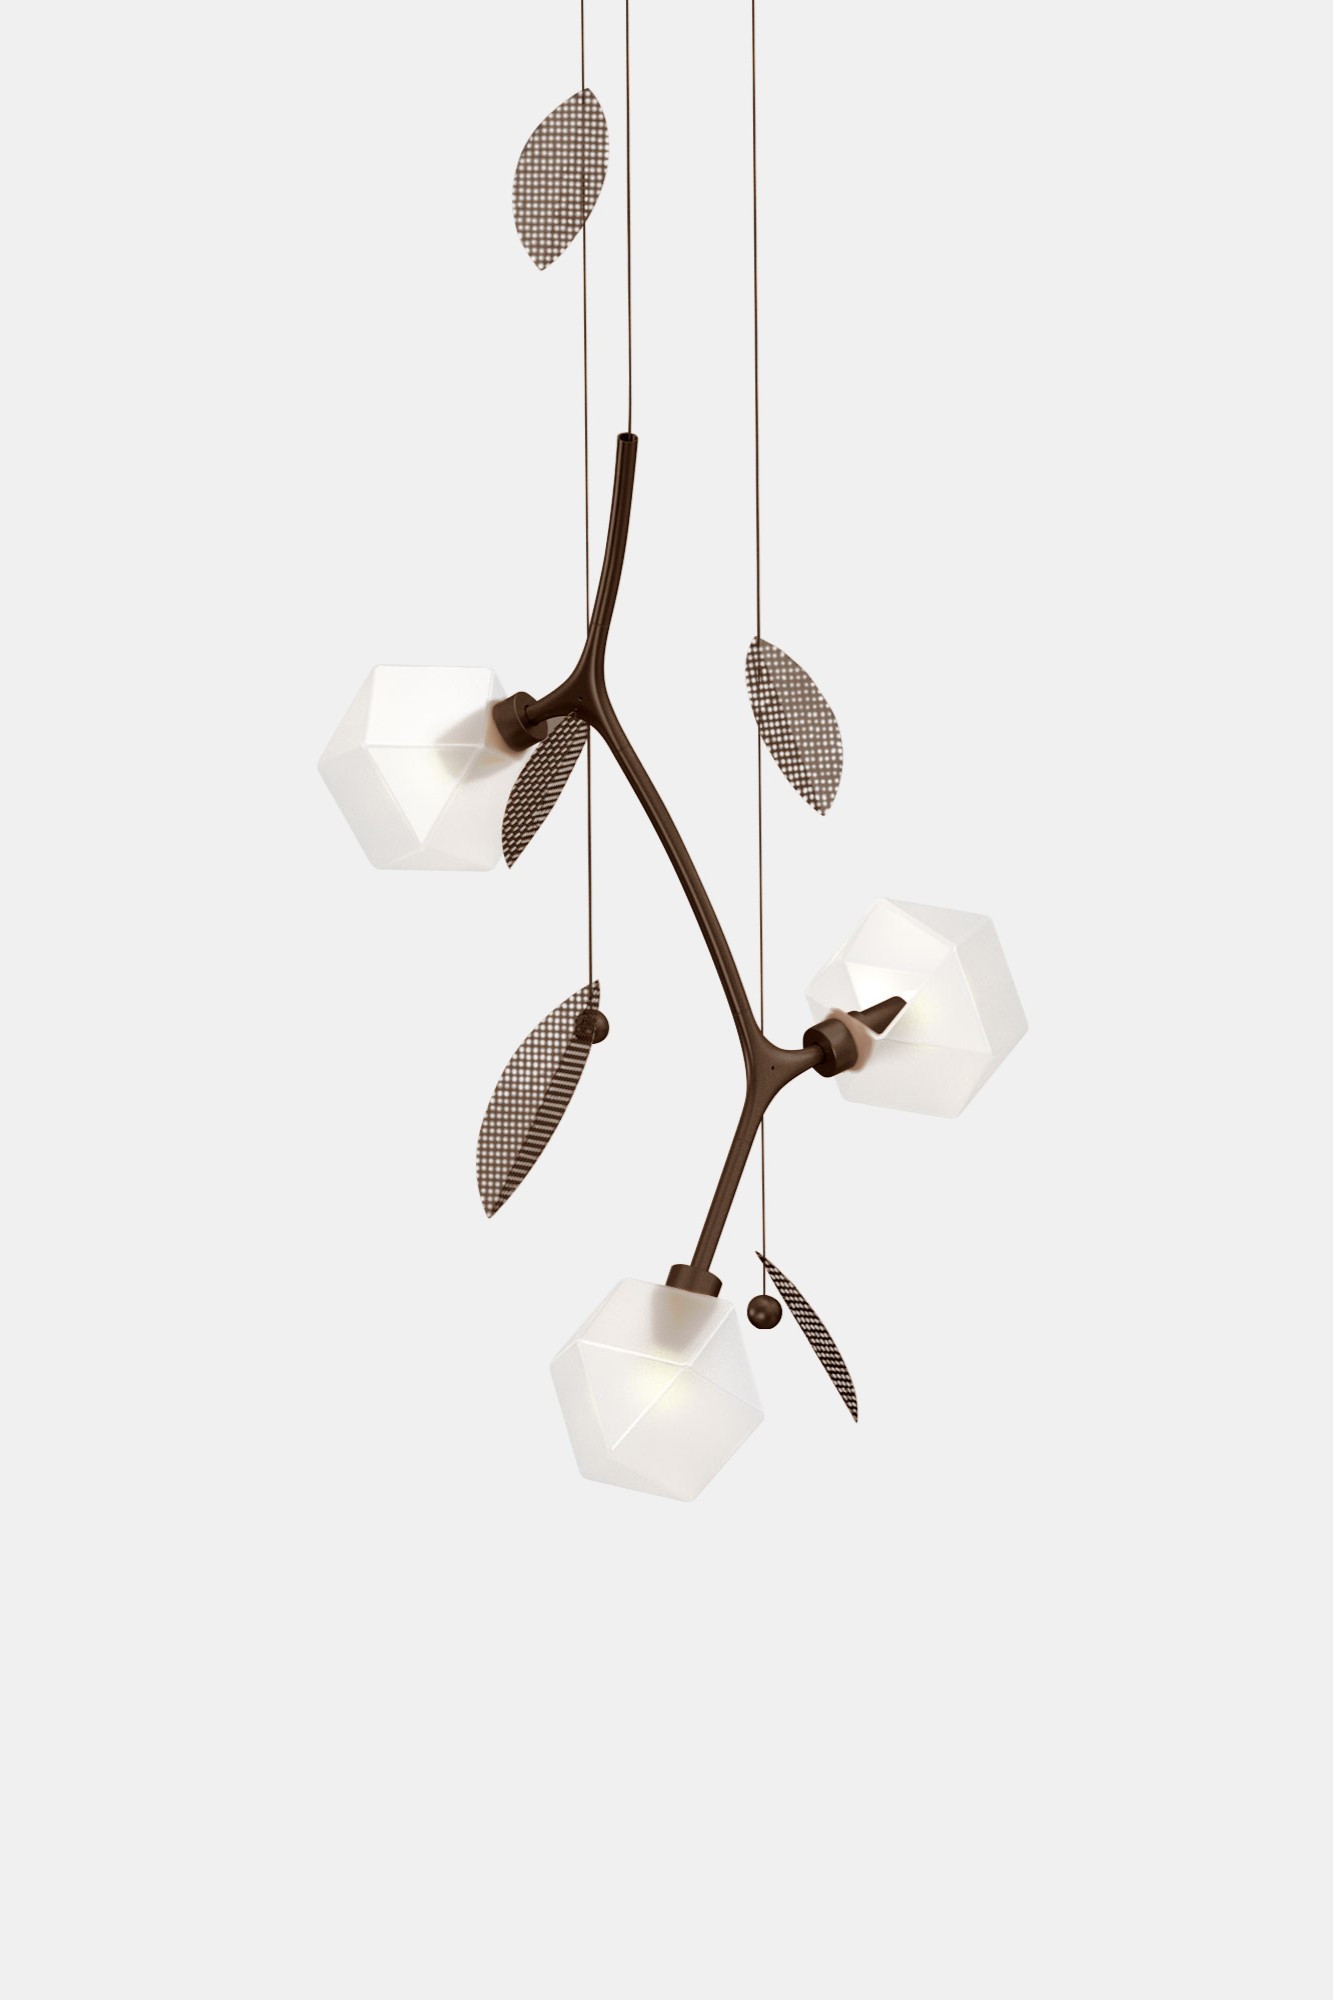 lighting collection, Gabriel Scott Launches Welles Reimagined Lighting Collection